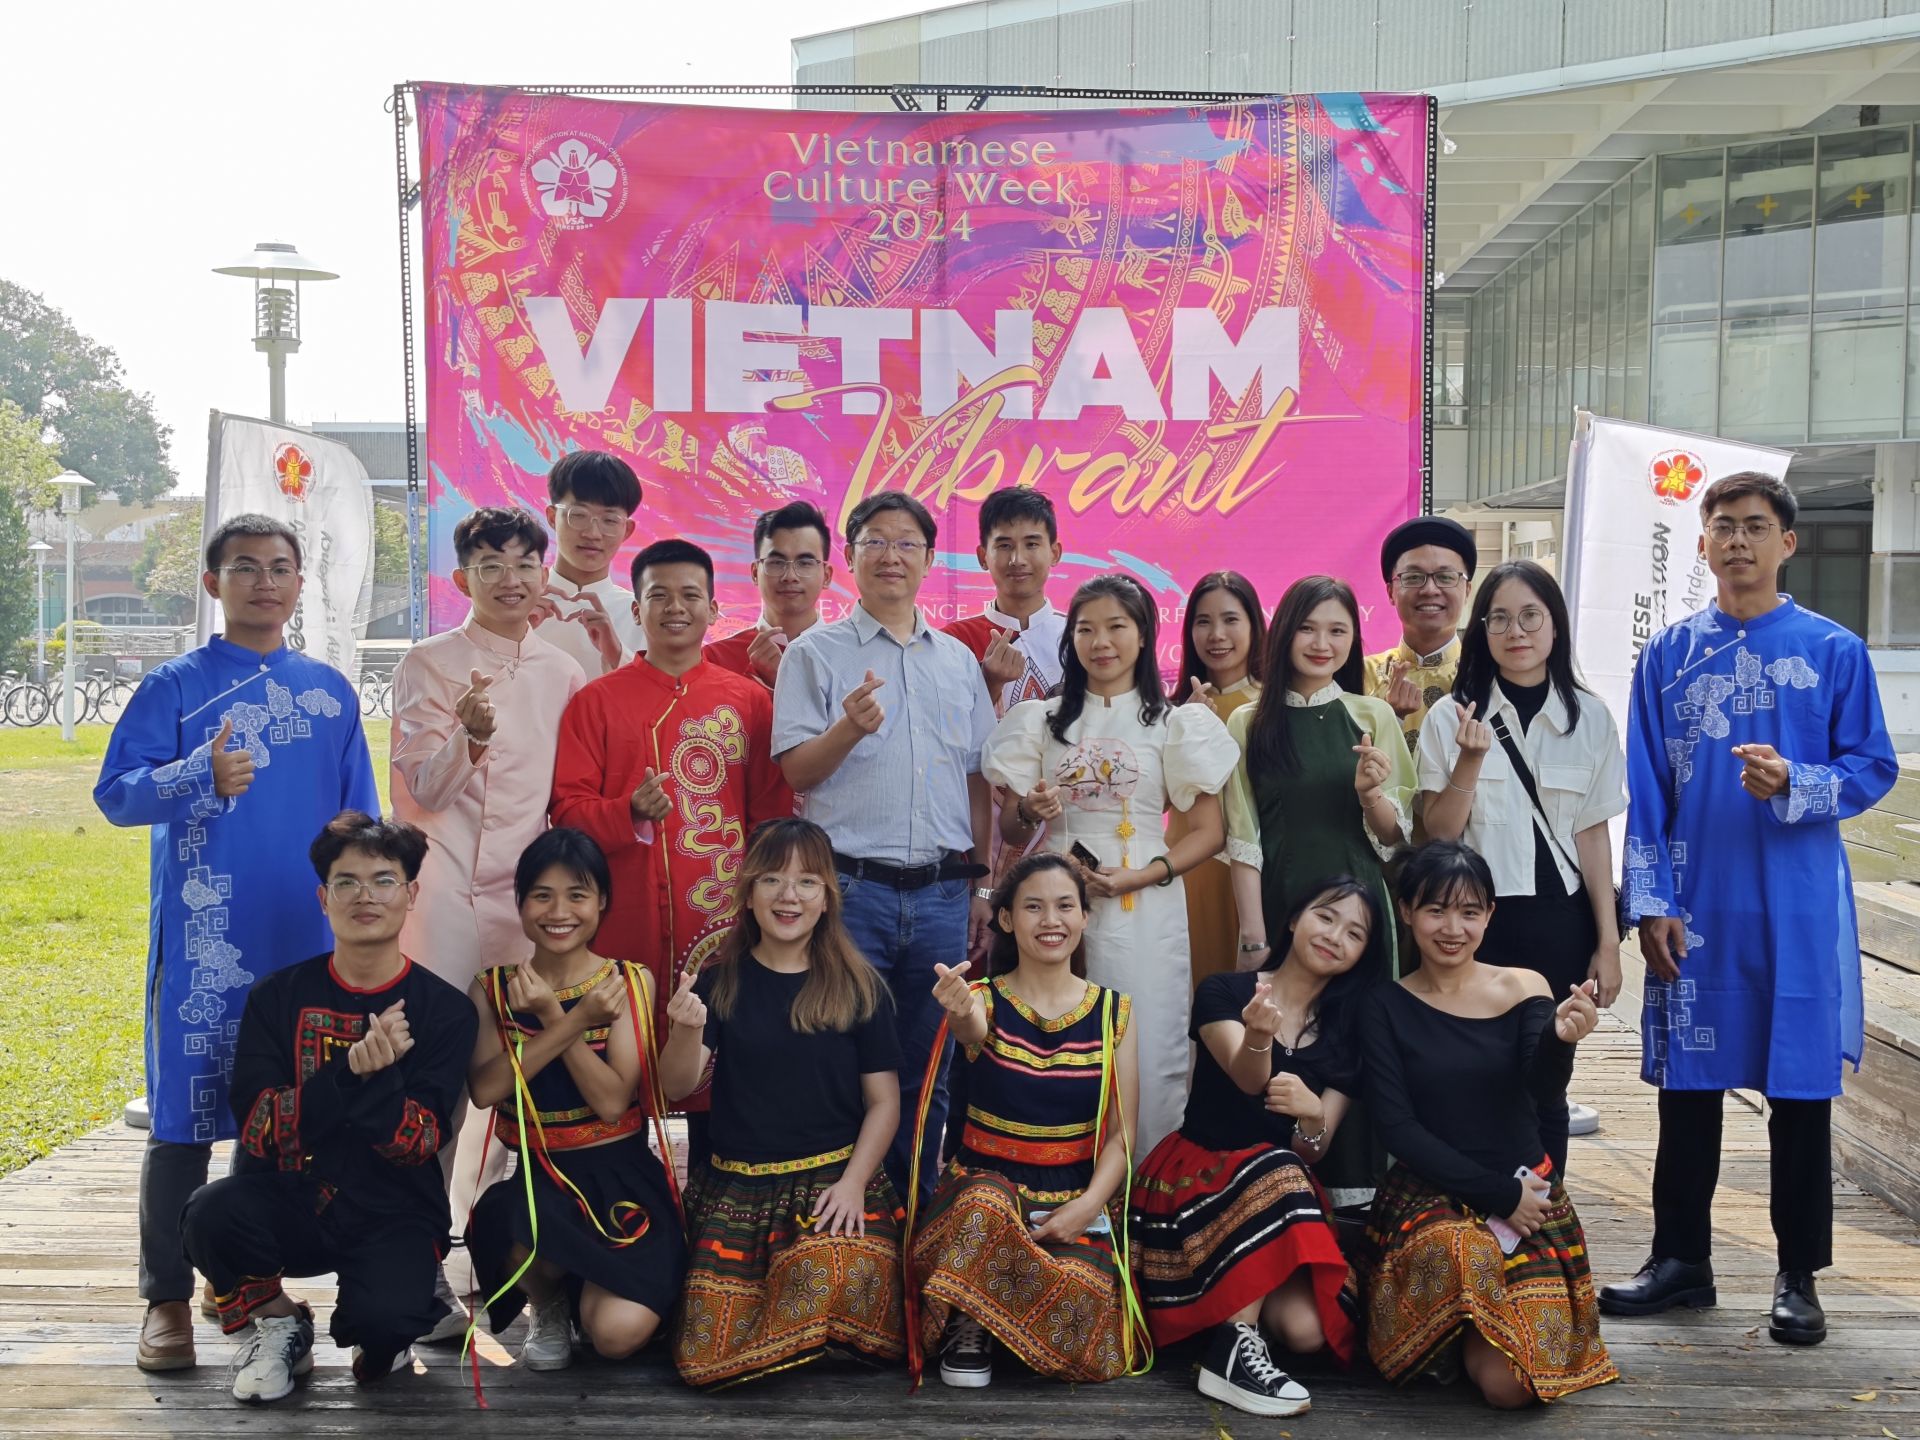 Vietnamese Culture Week 2024 program from April 13 to 20, 2024.